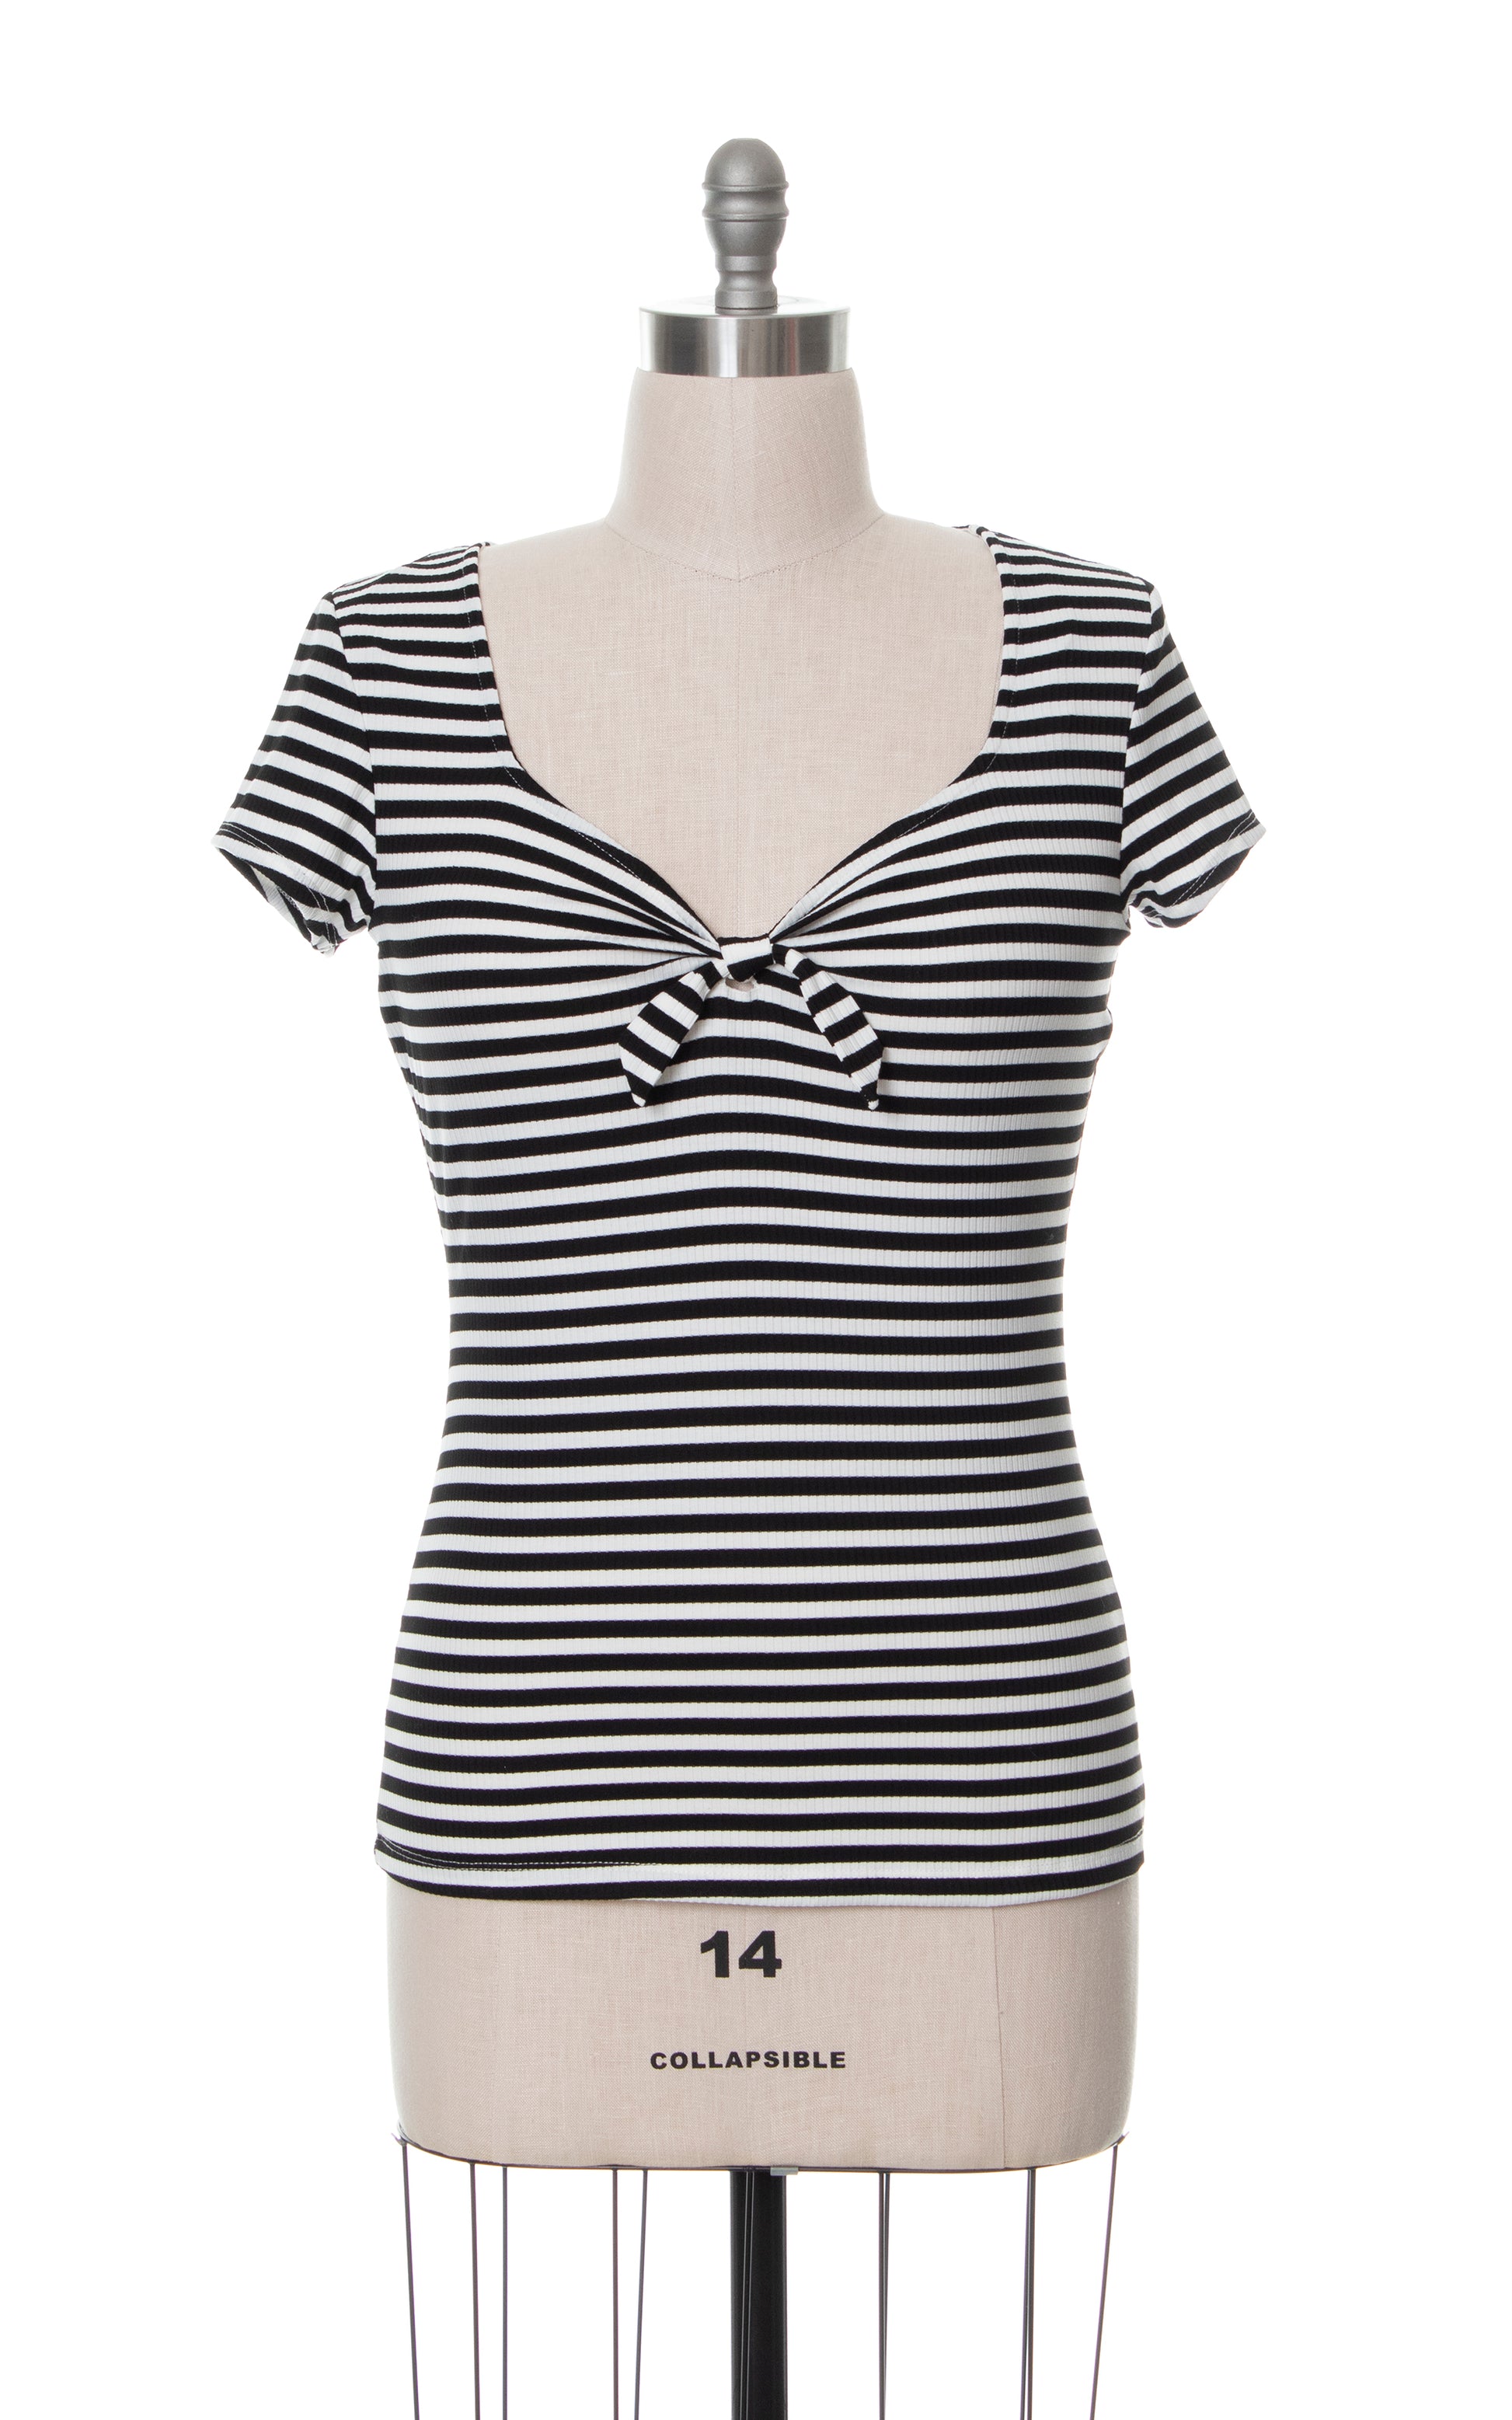 MODERN New with Tags UNIQUE VINTAGE Pin Up Striped T-Shirt Top Birthday Life Vintage